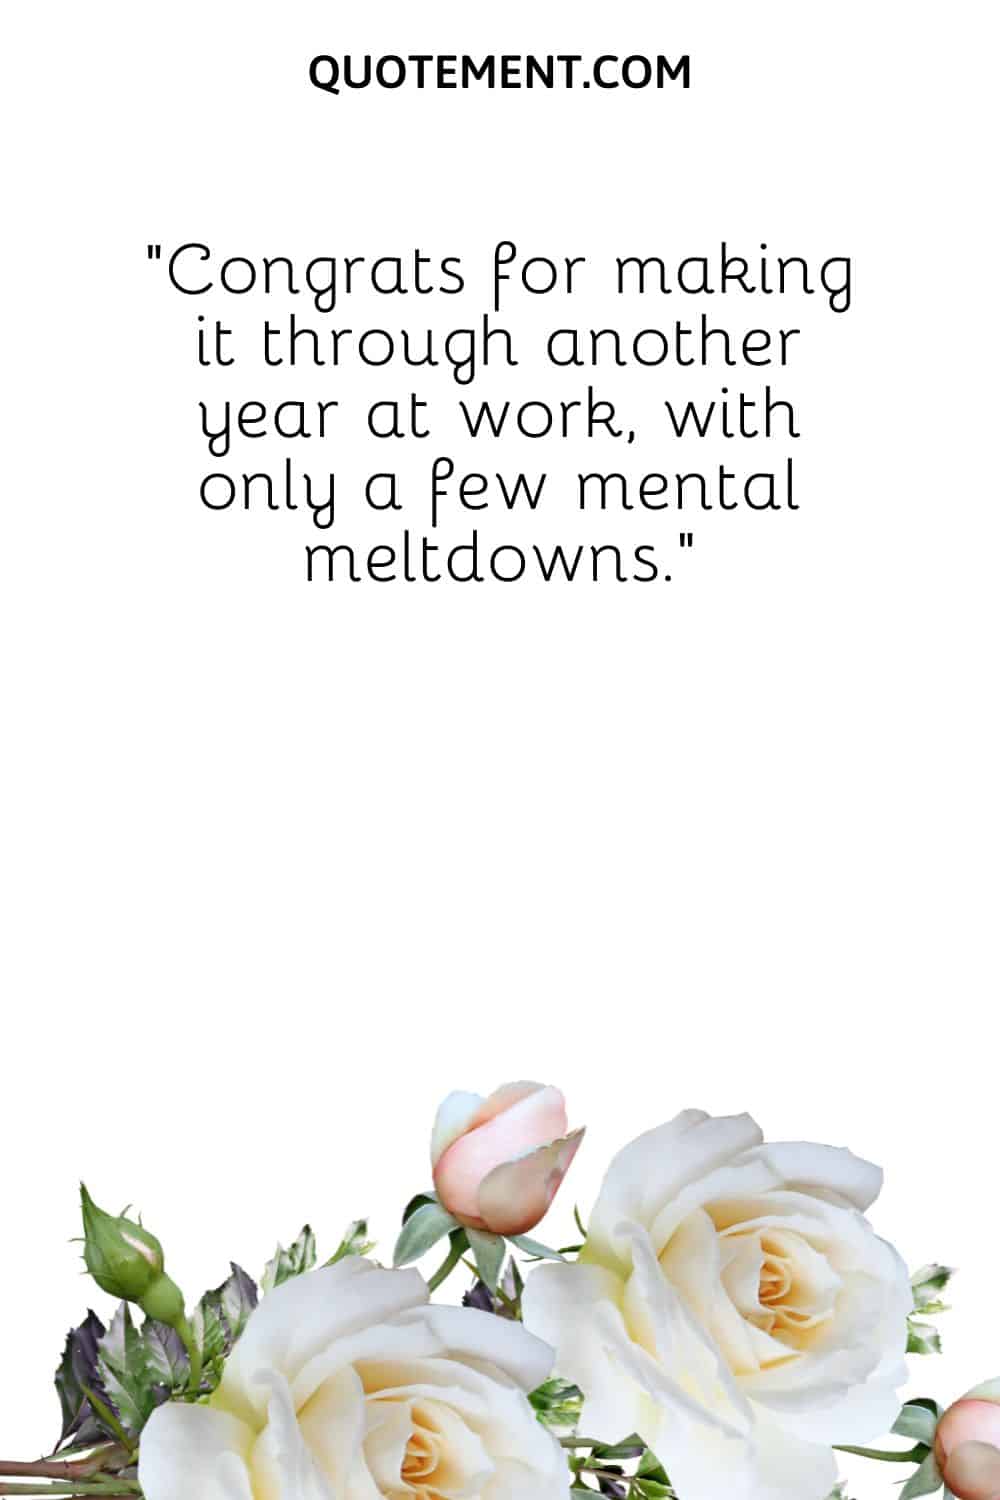 “Congrats for making it through another year at work, with only a few mental meltdowns.”